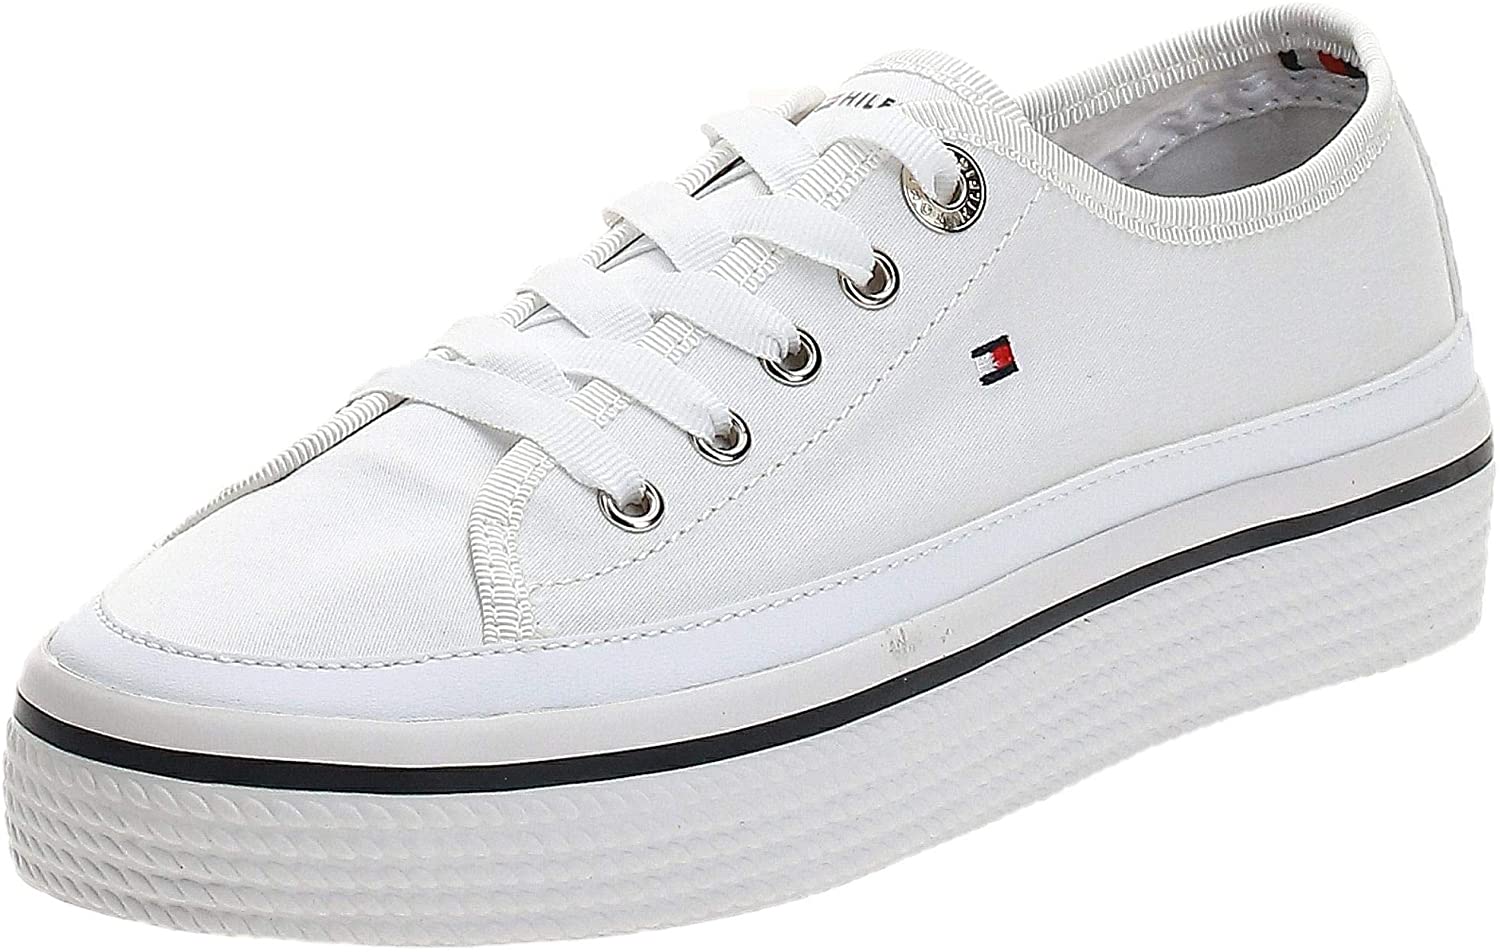 Tommy Hilfiger Corporate Flat Sneakers, Baskets Basses Femme